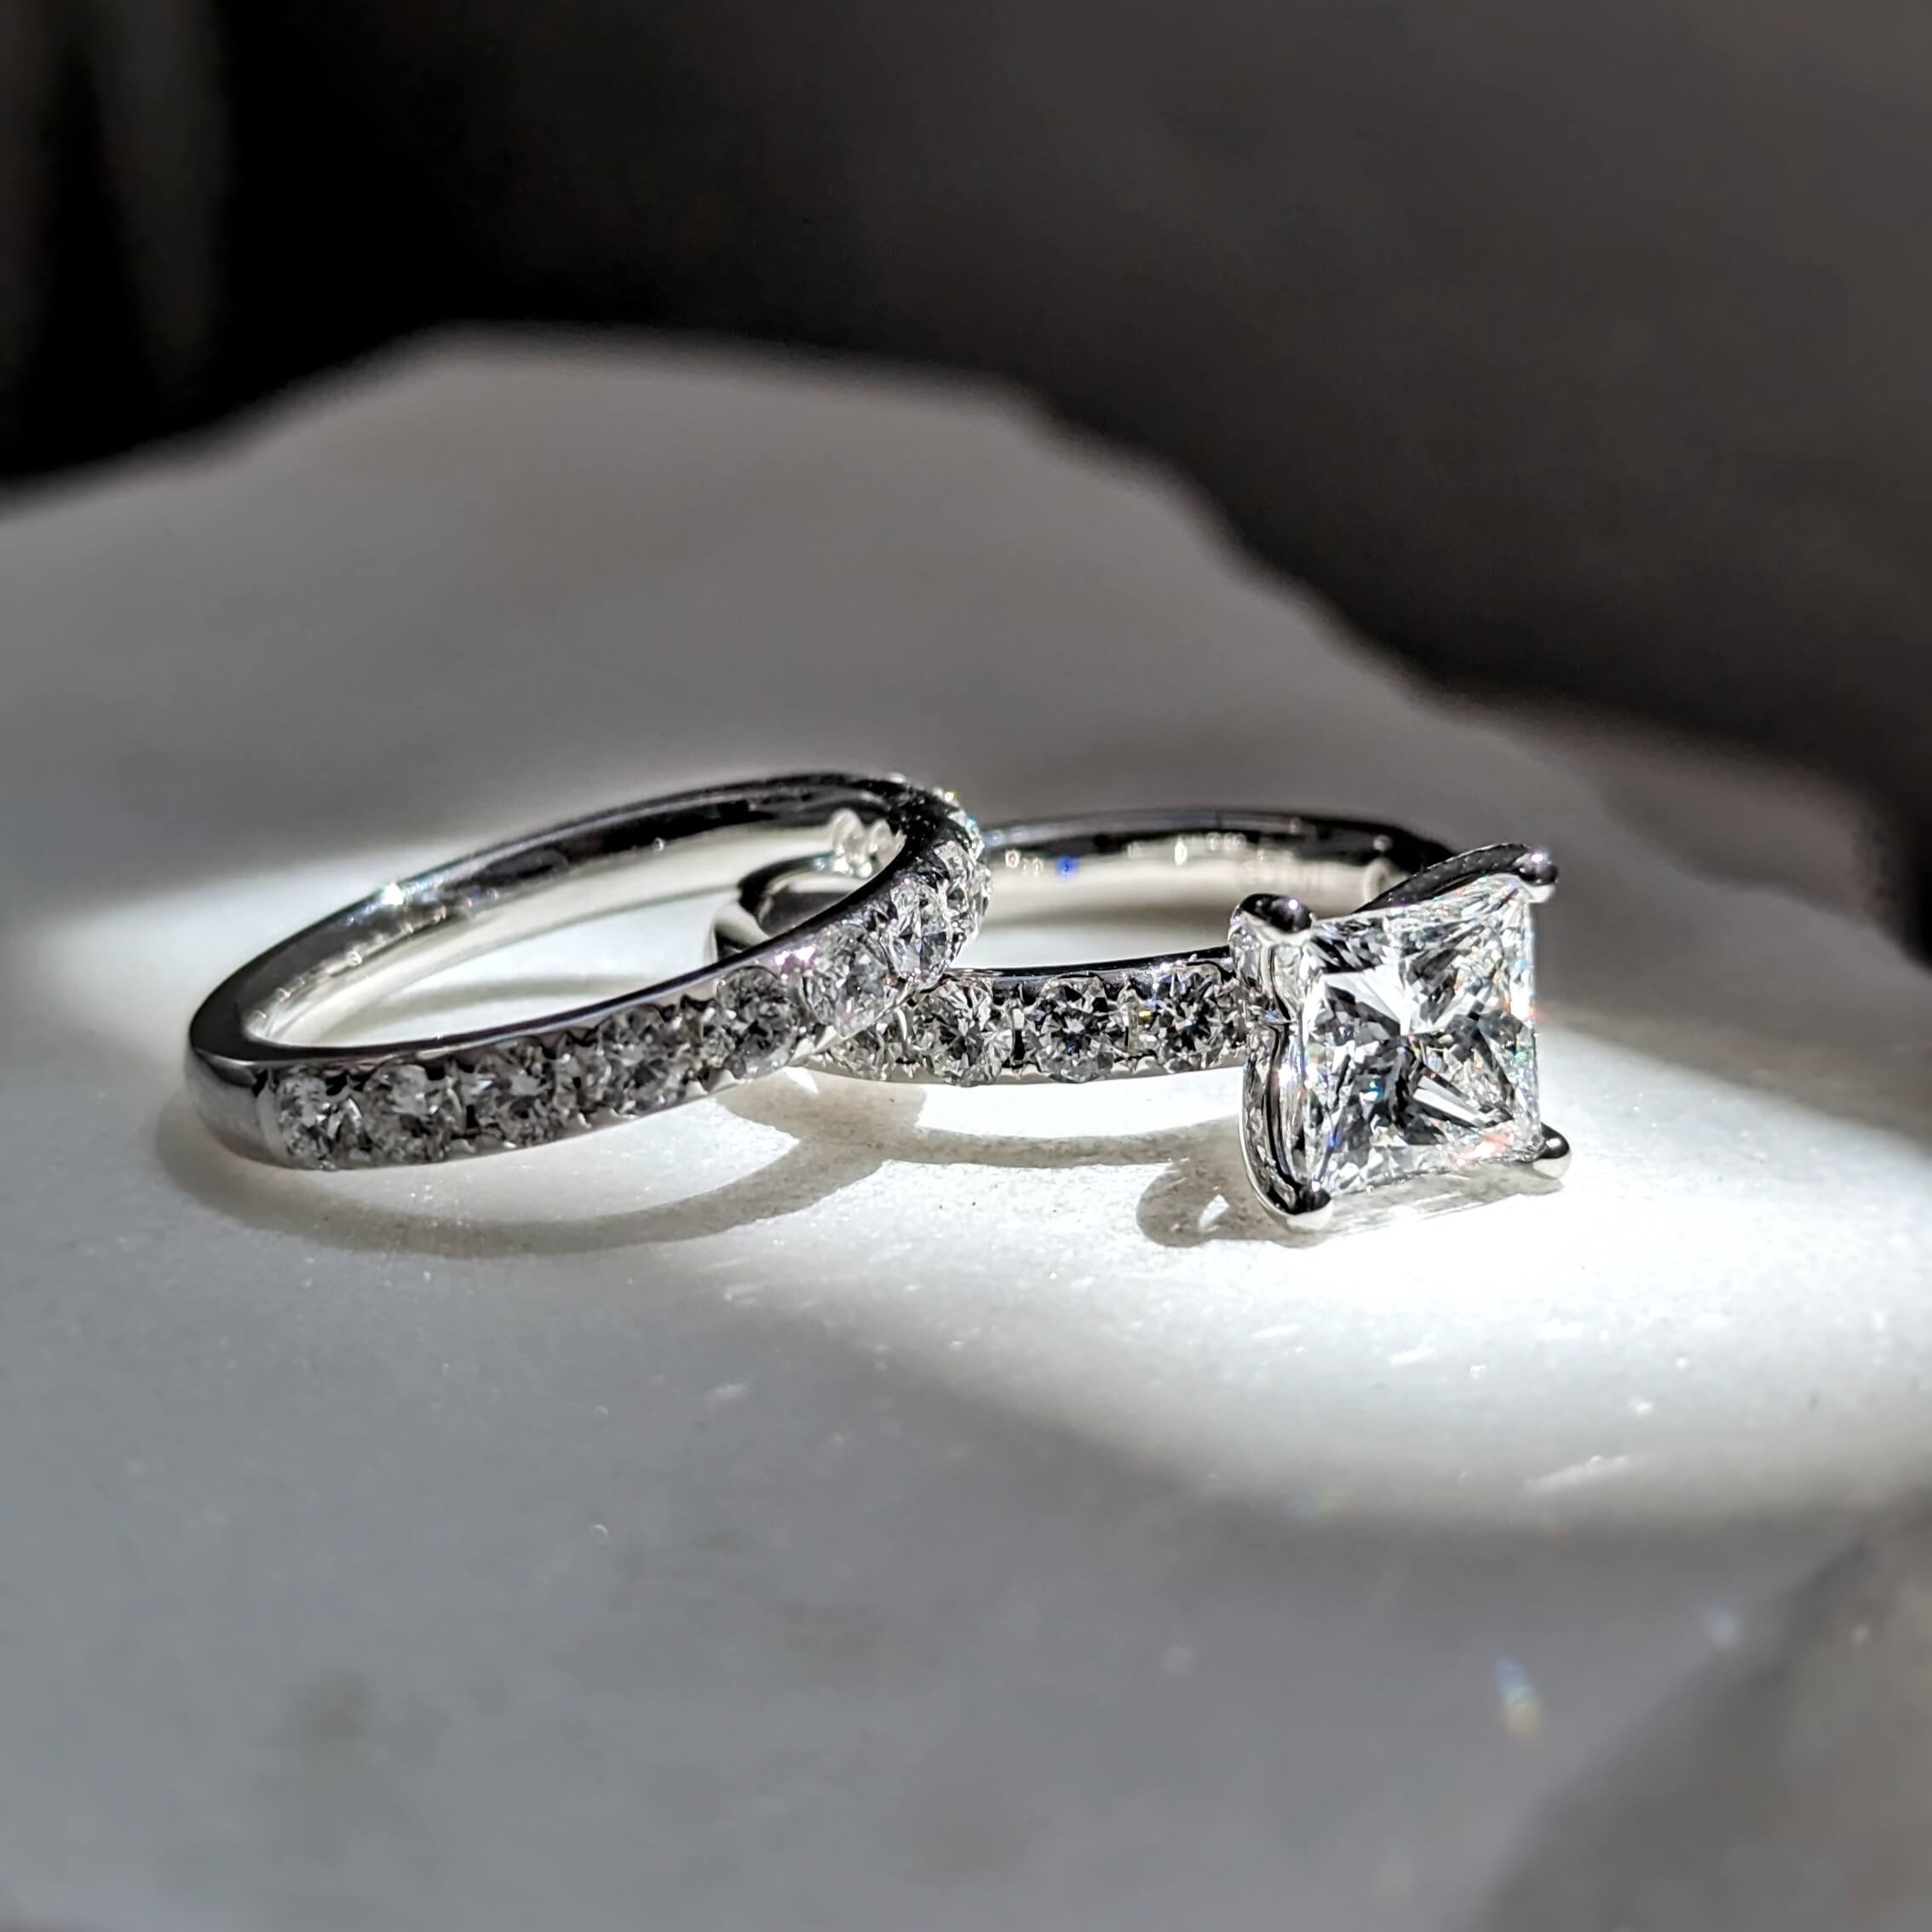 Princess cut solitaire diamond engagement ring with matching wedding ring in pave style setting